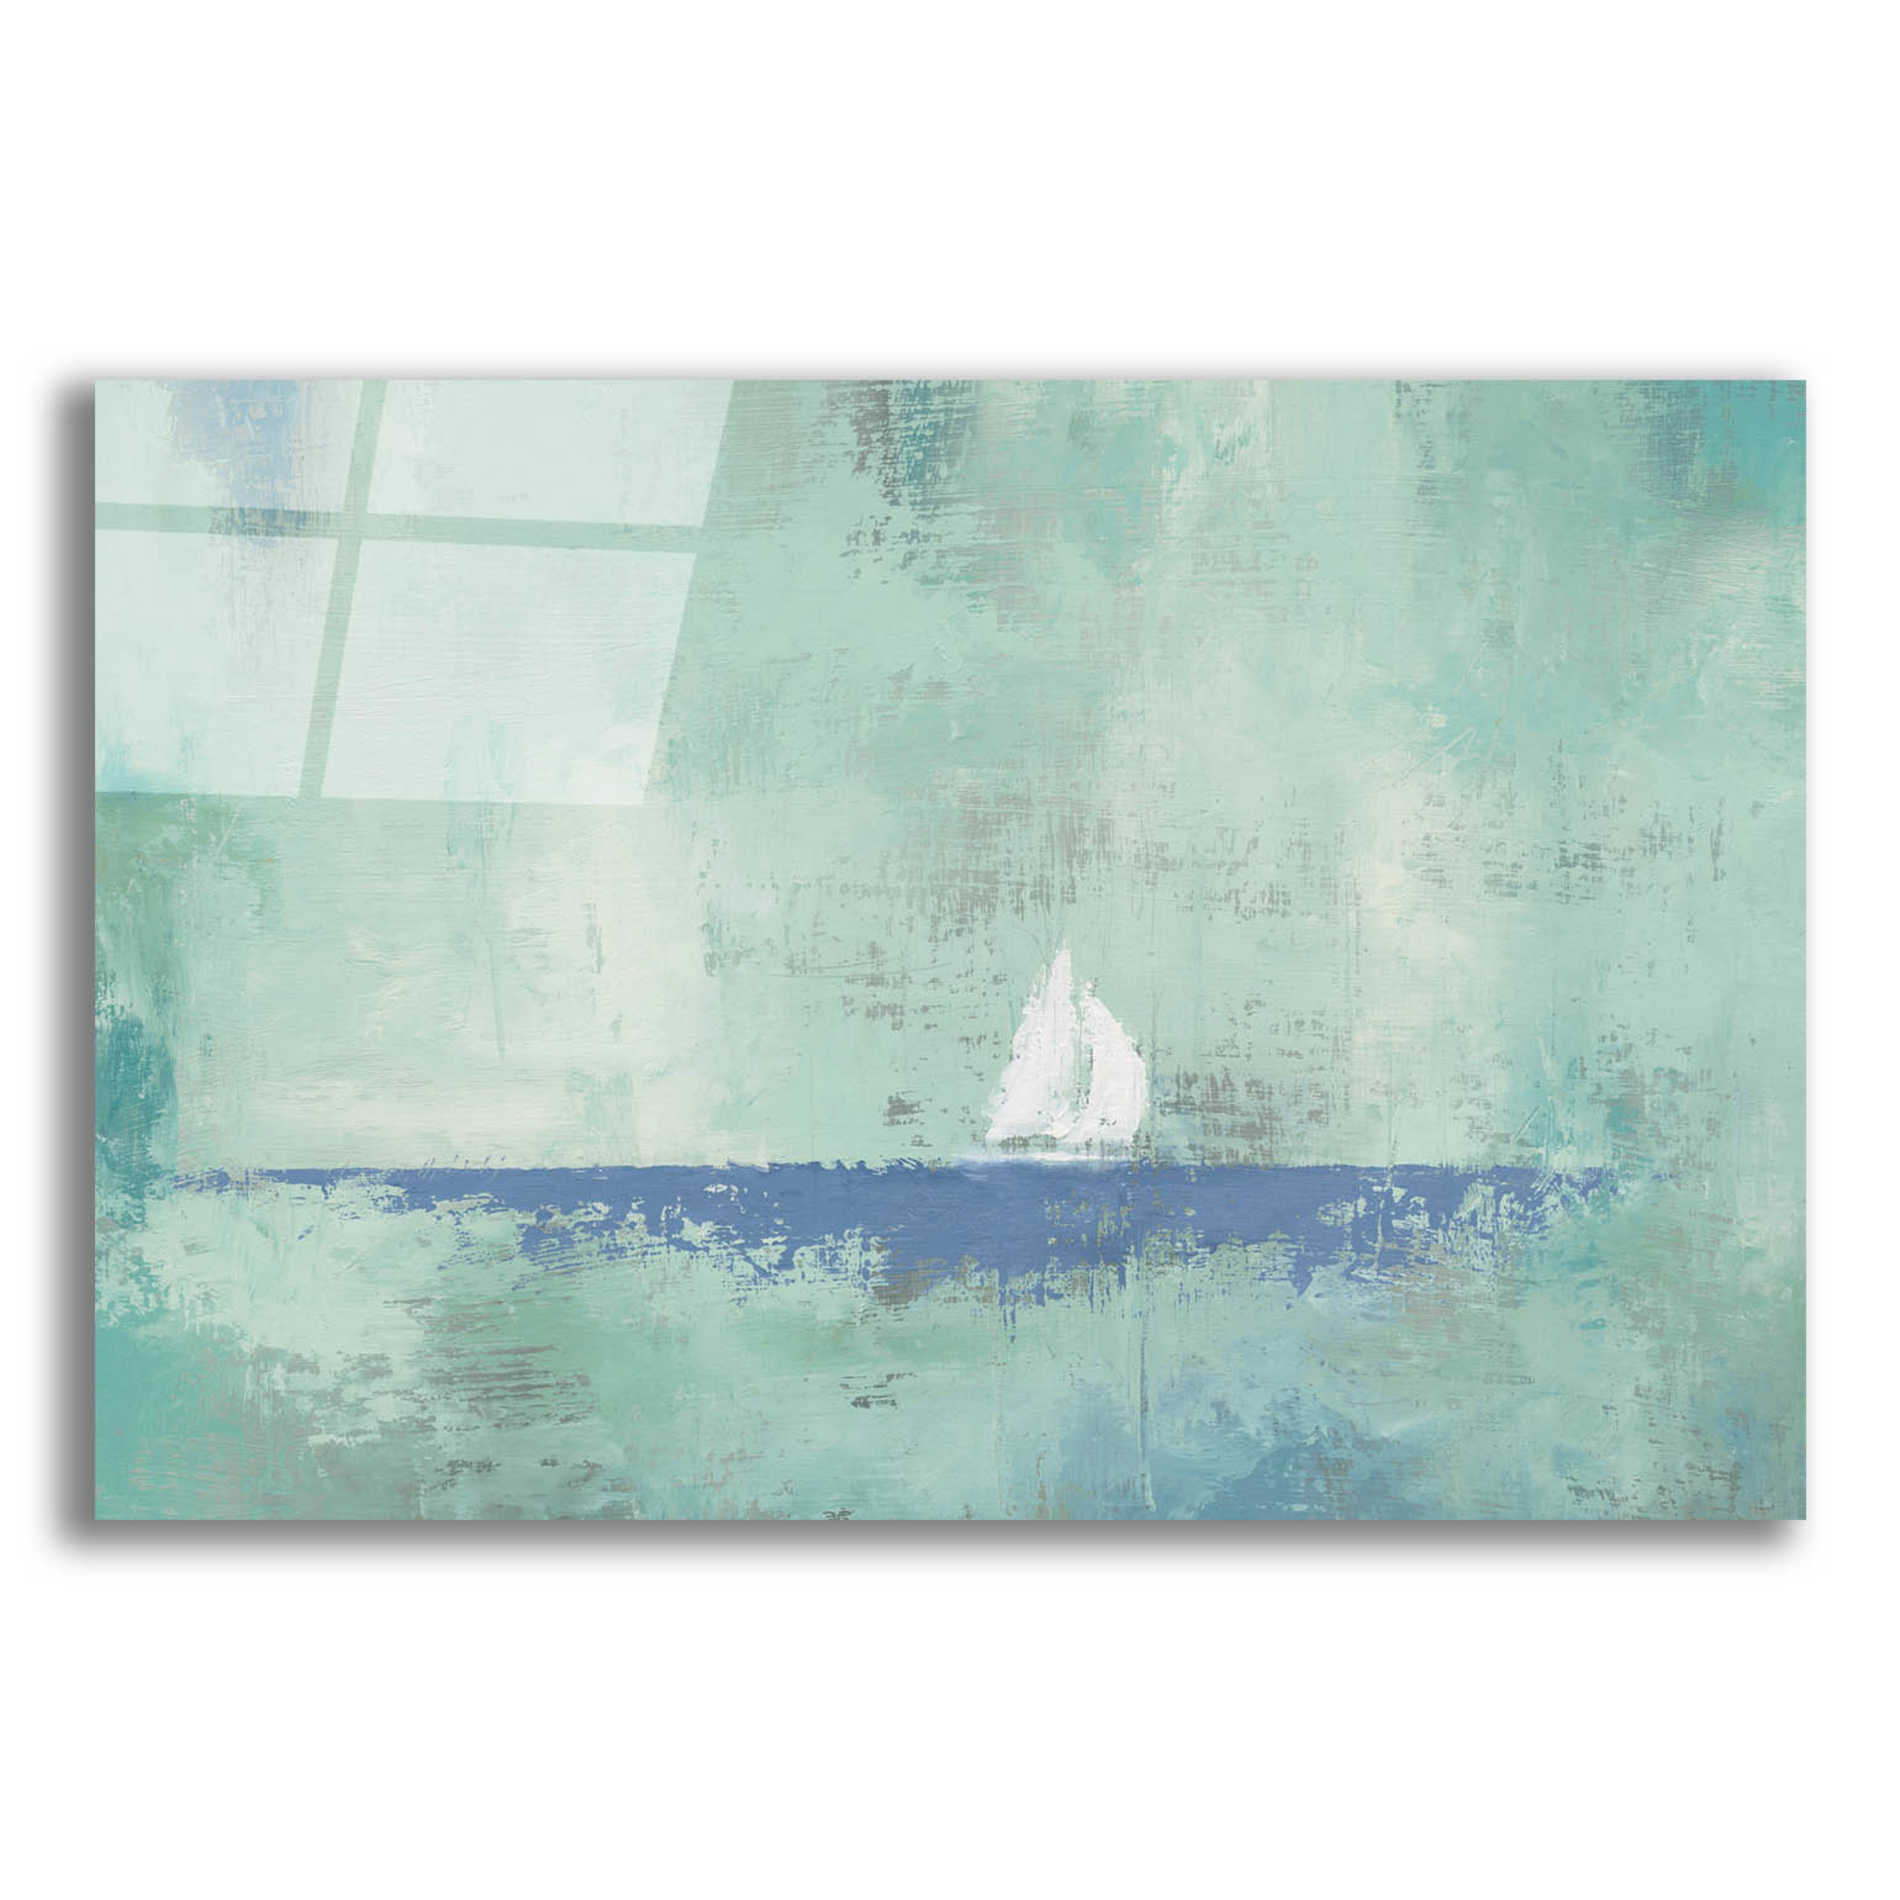 Epic Art 'Sailboat Dream' by James Wiens, Acrylic Glass Wall Art,18x12x1.1x0,26x18x1.1x0,40x26x1.74x0,60x40x1.74x0